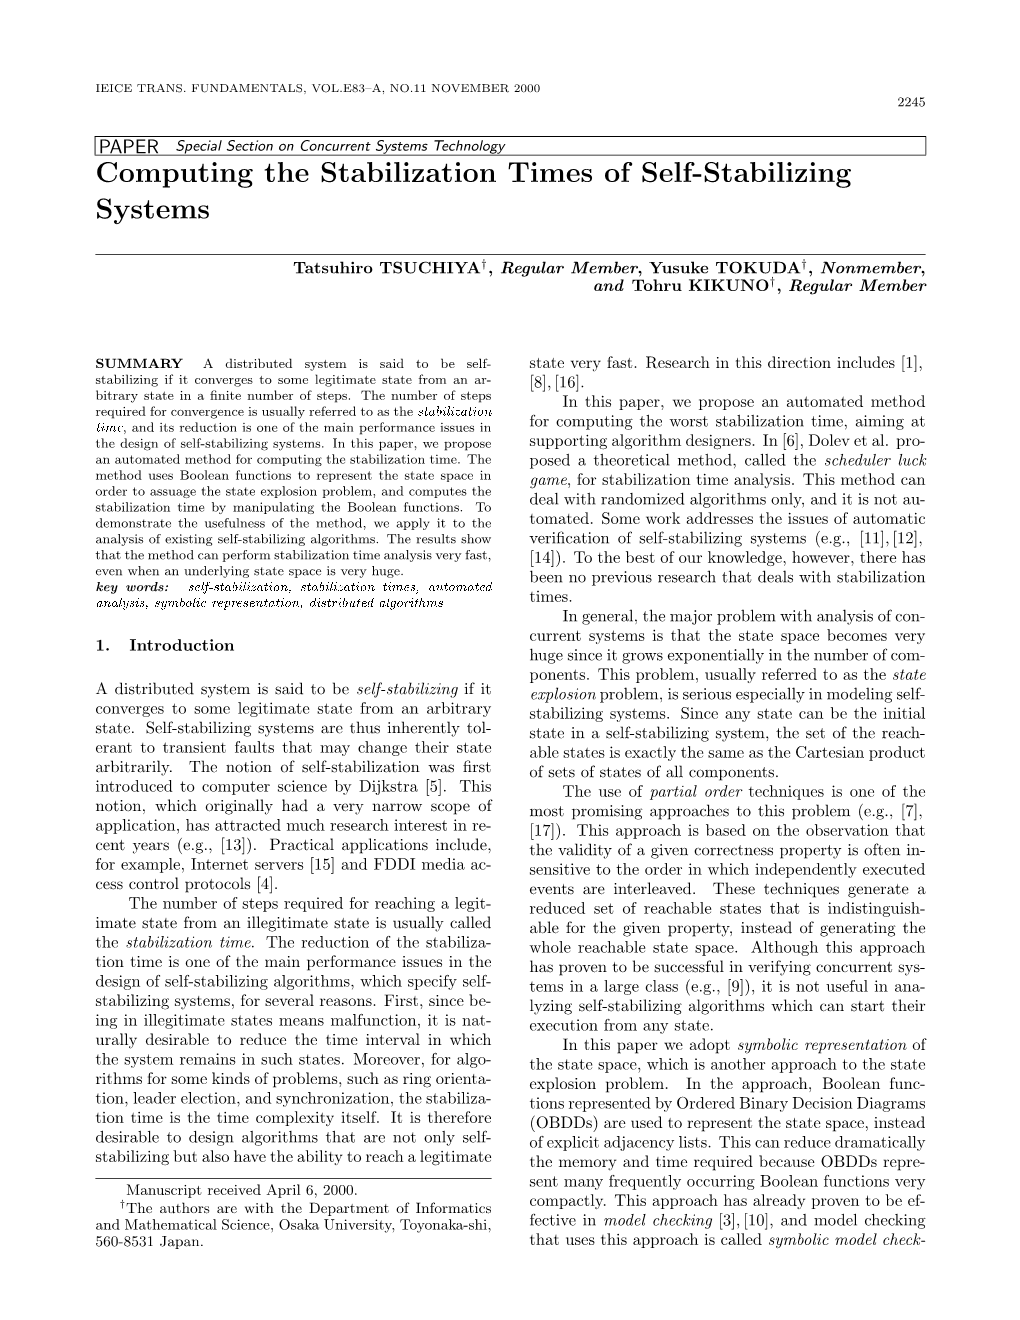 Computing the Stabilization Times of Self-Stabilizing Systems